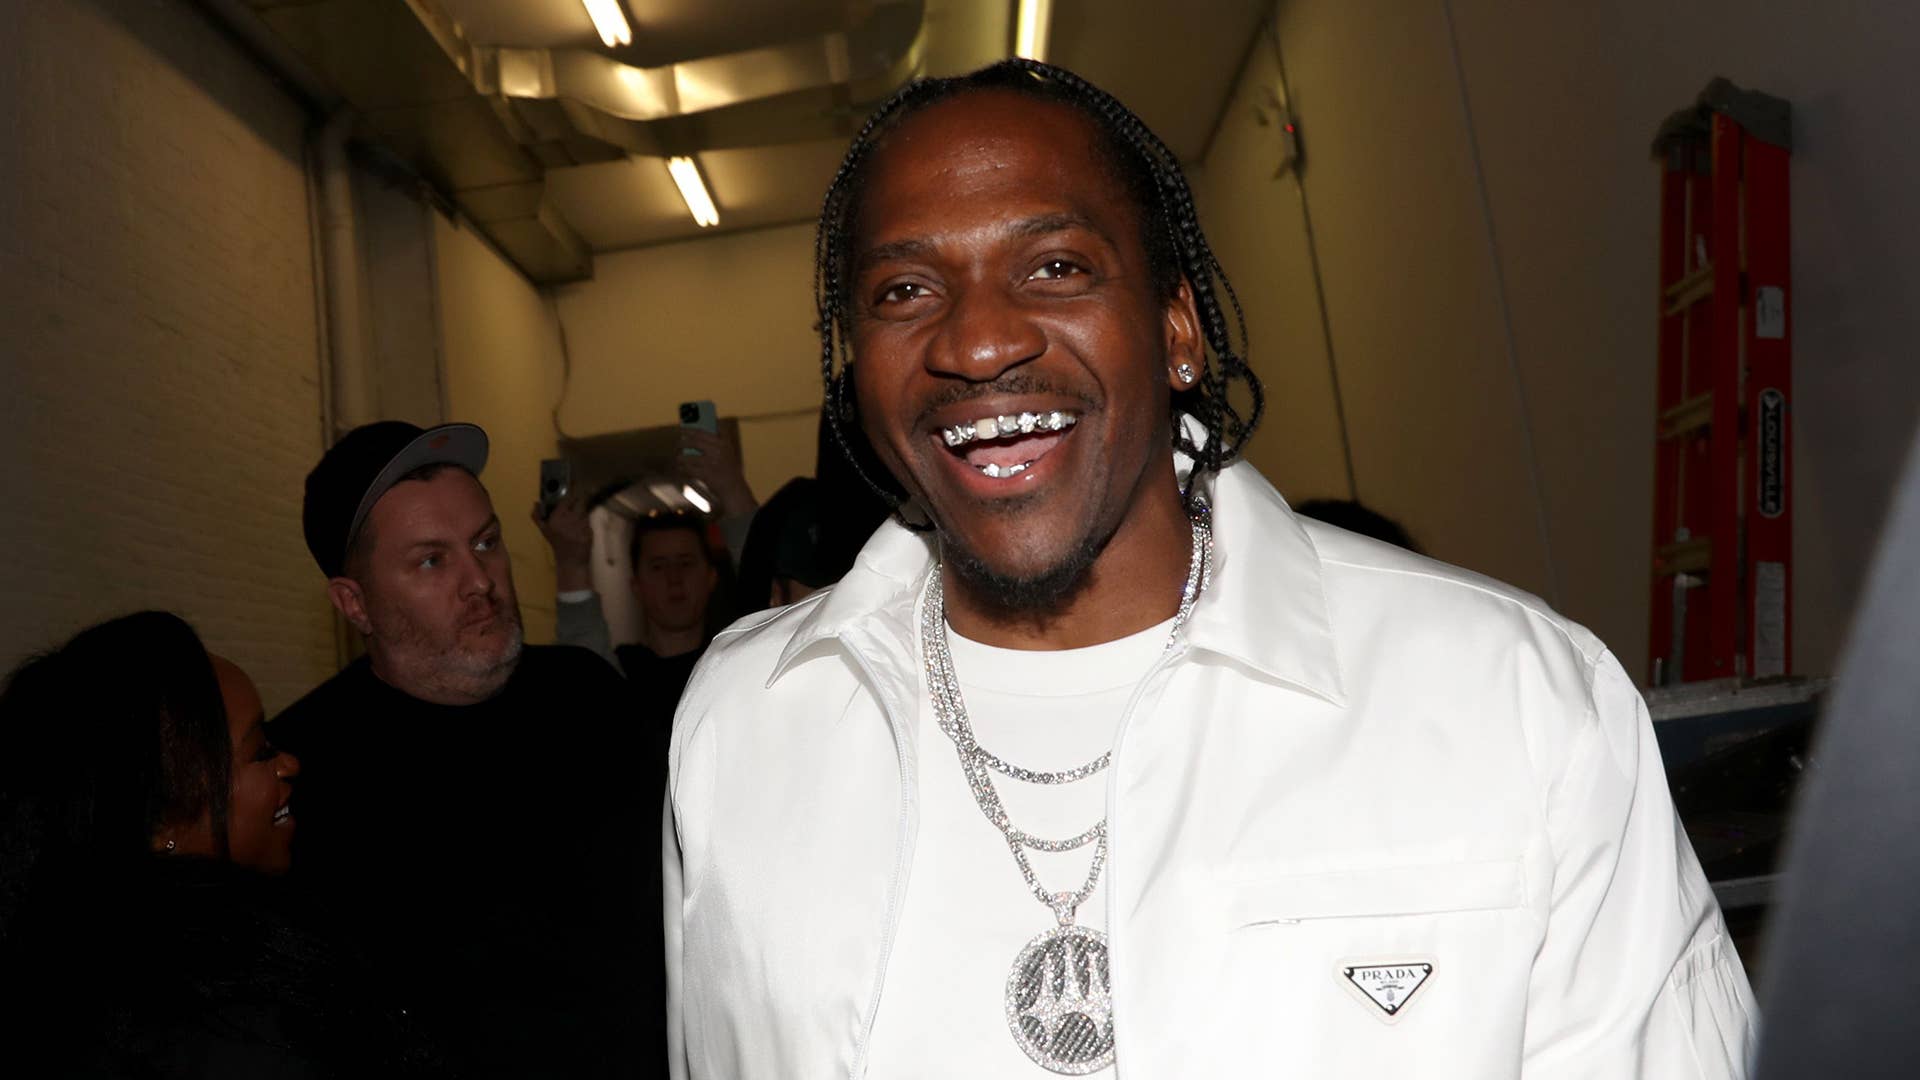 Pusha T attends Pusha T It's Almost Dry Album Listening Event In NYC at Studio 525